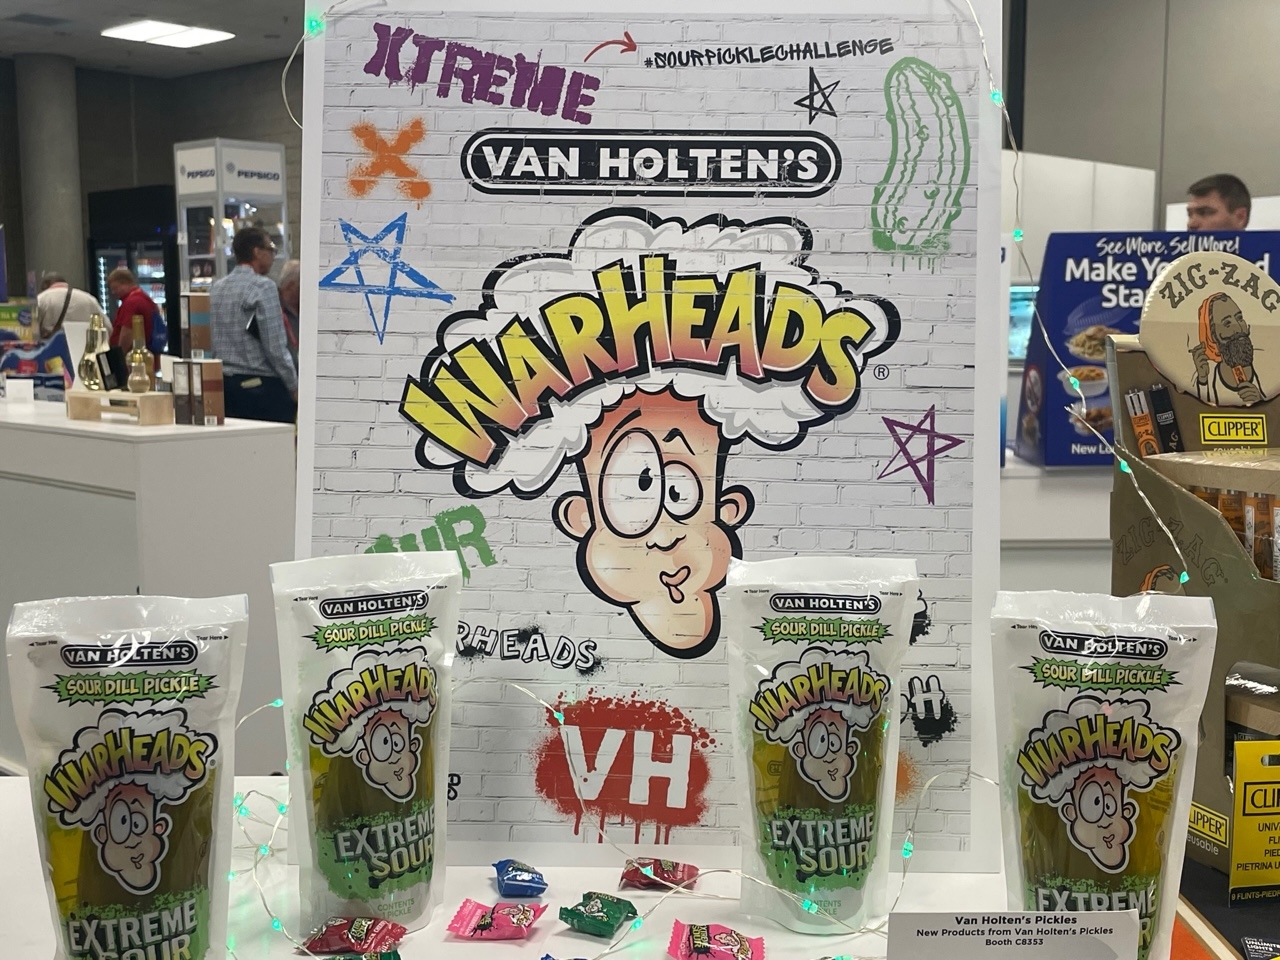 Licensing the Warheads flavor for its pickle-in-a-pouch, Van Holten's debuts its Extreme Sour Dill Pickle flavor. Image source: D. Ataman